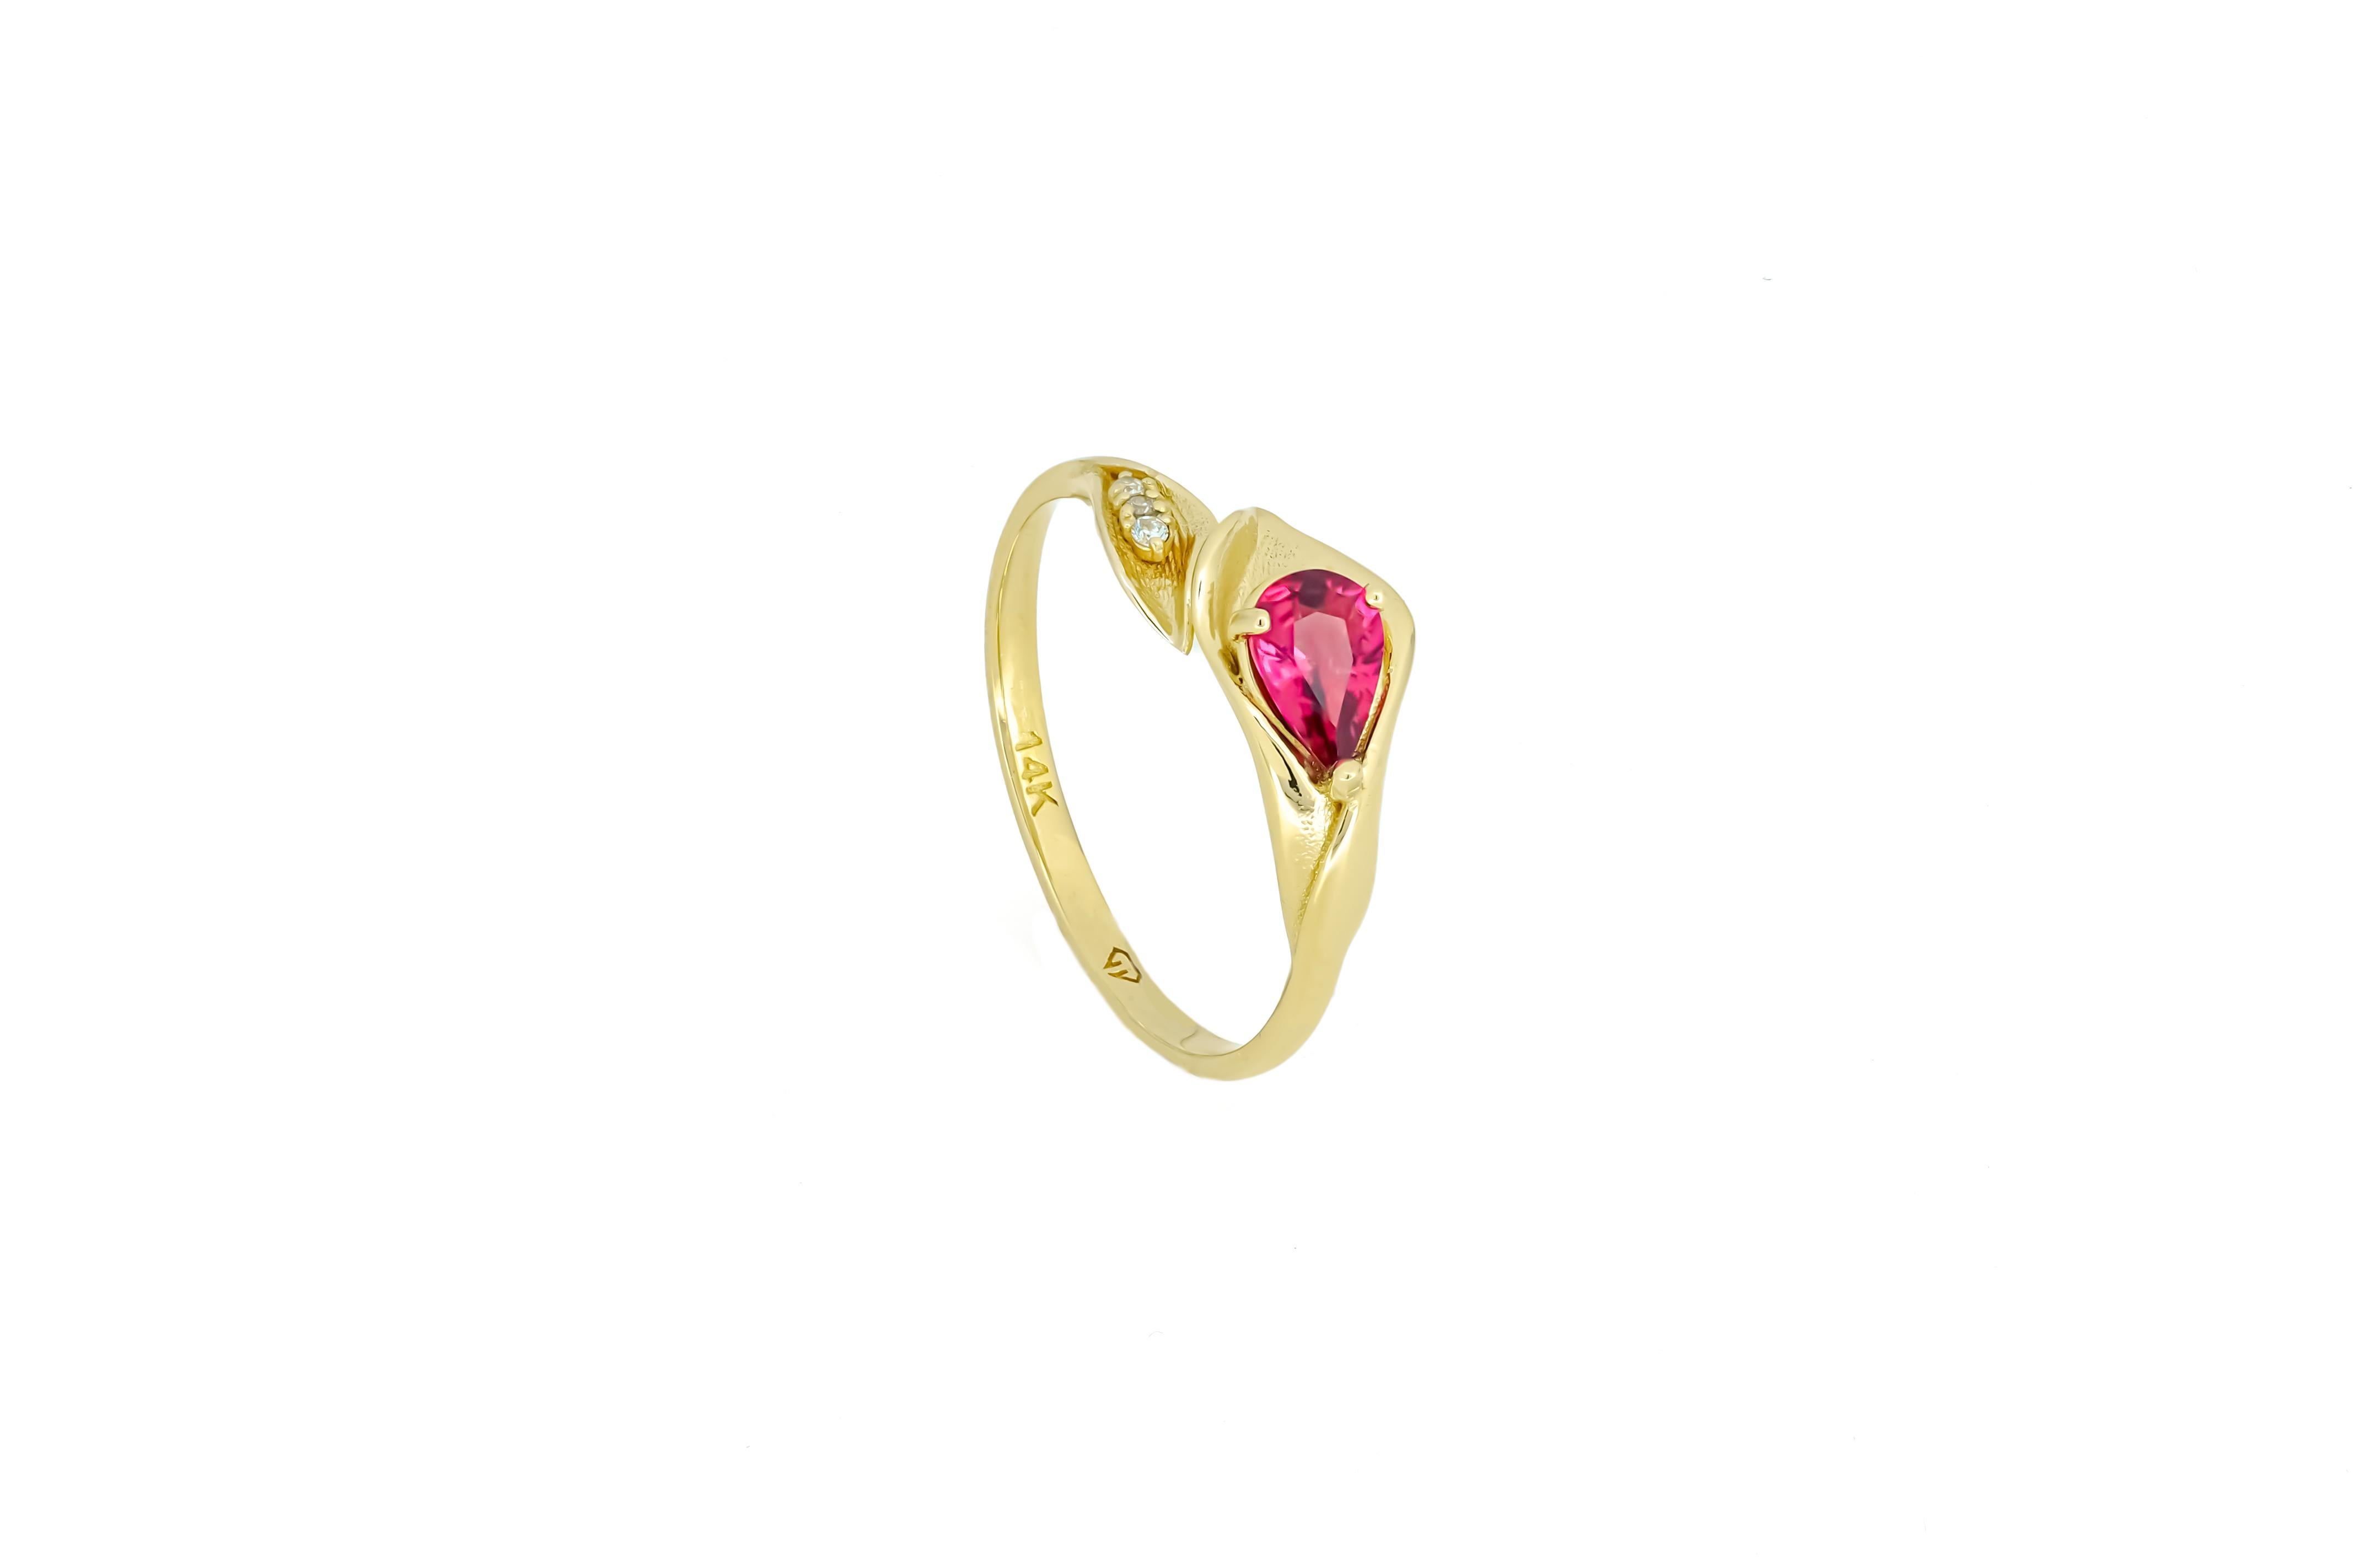 Lily Calla Gold Ring, 14 Karat Gold Ring with Garnet and Diamonds 6